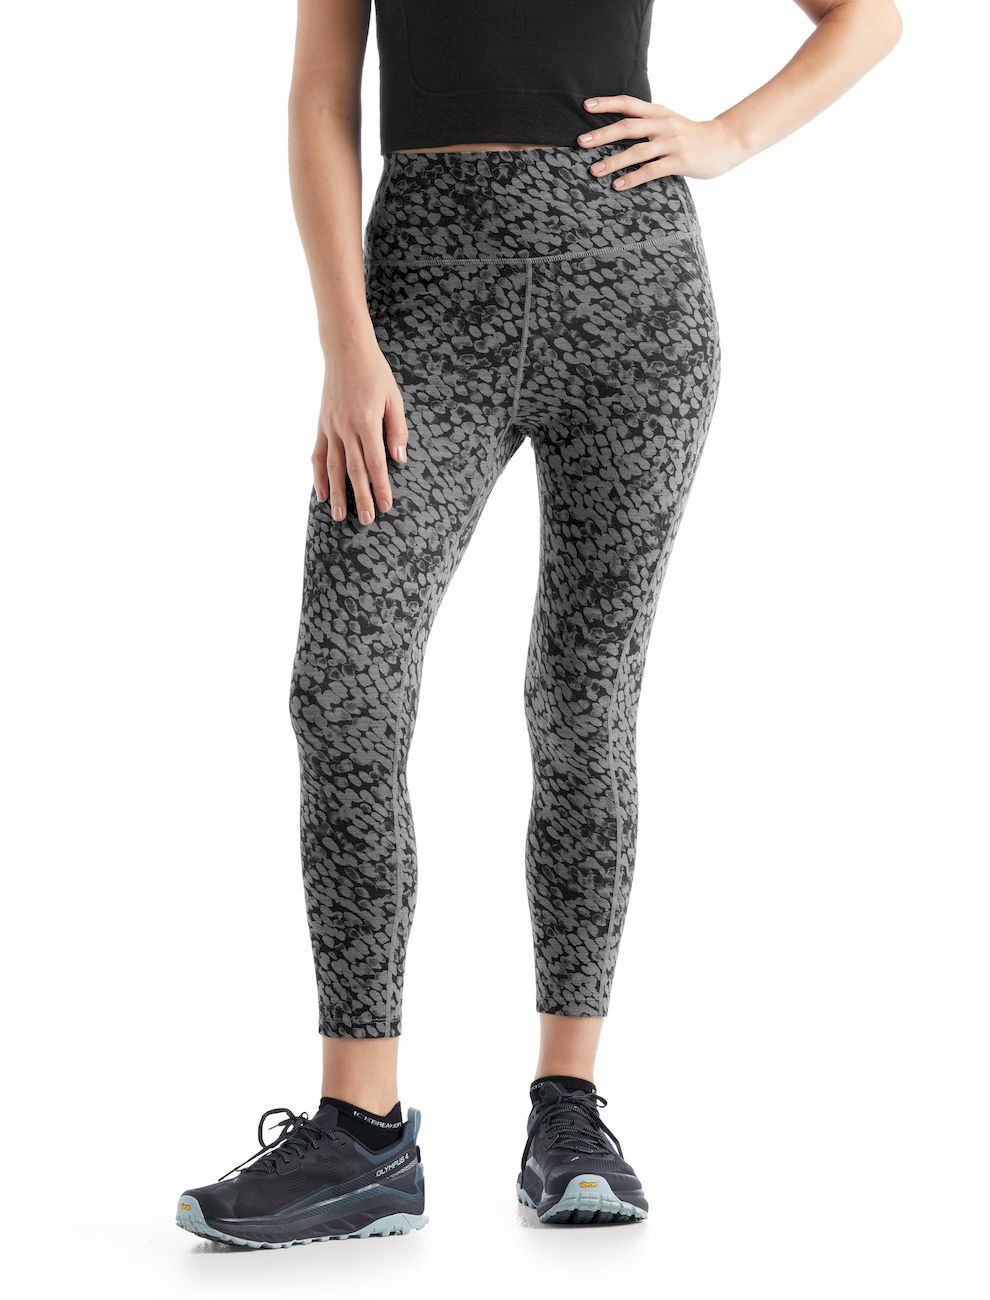 Icebreaker Fastray High Rise Tights Forest Shadow - Running leggings - Women's